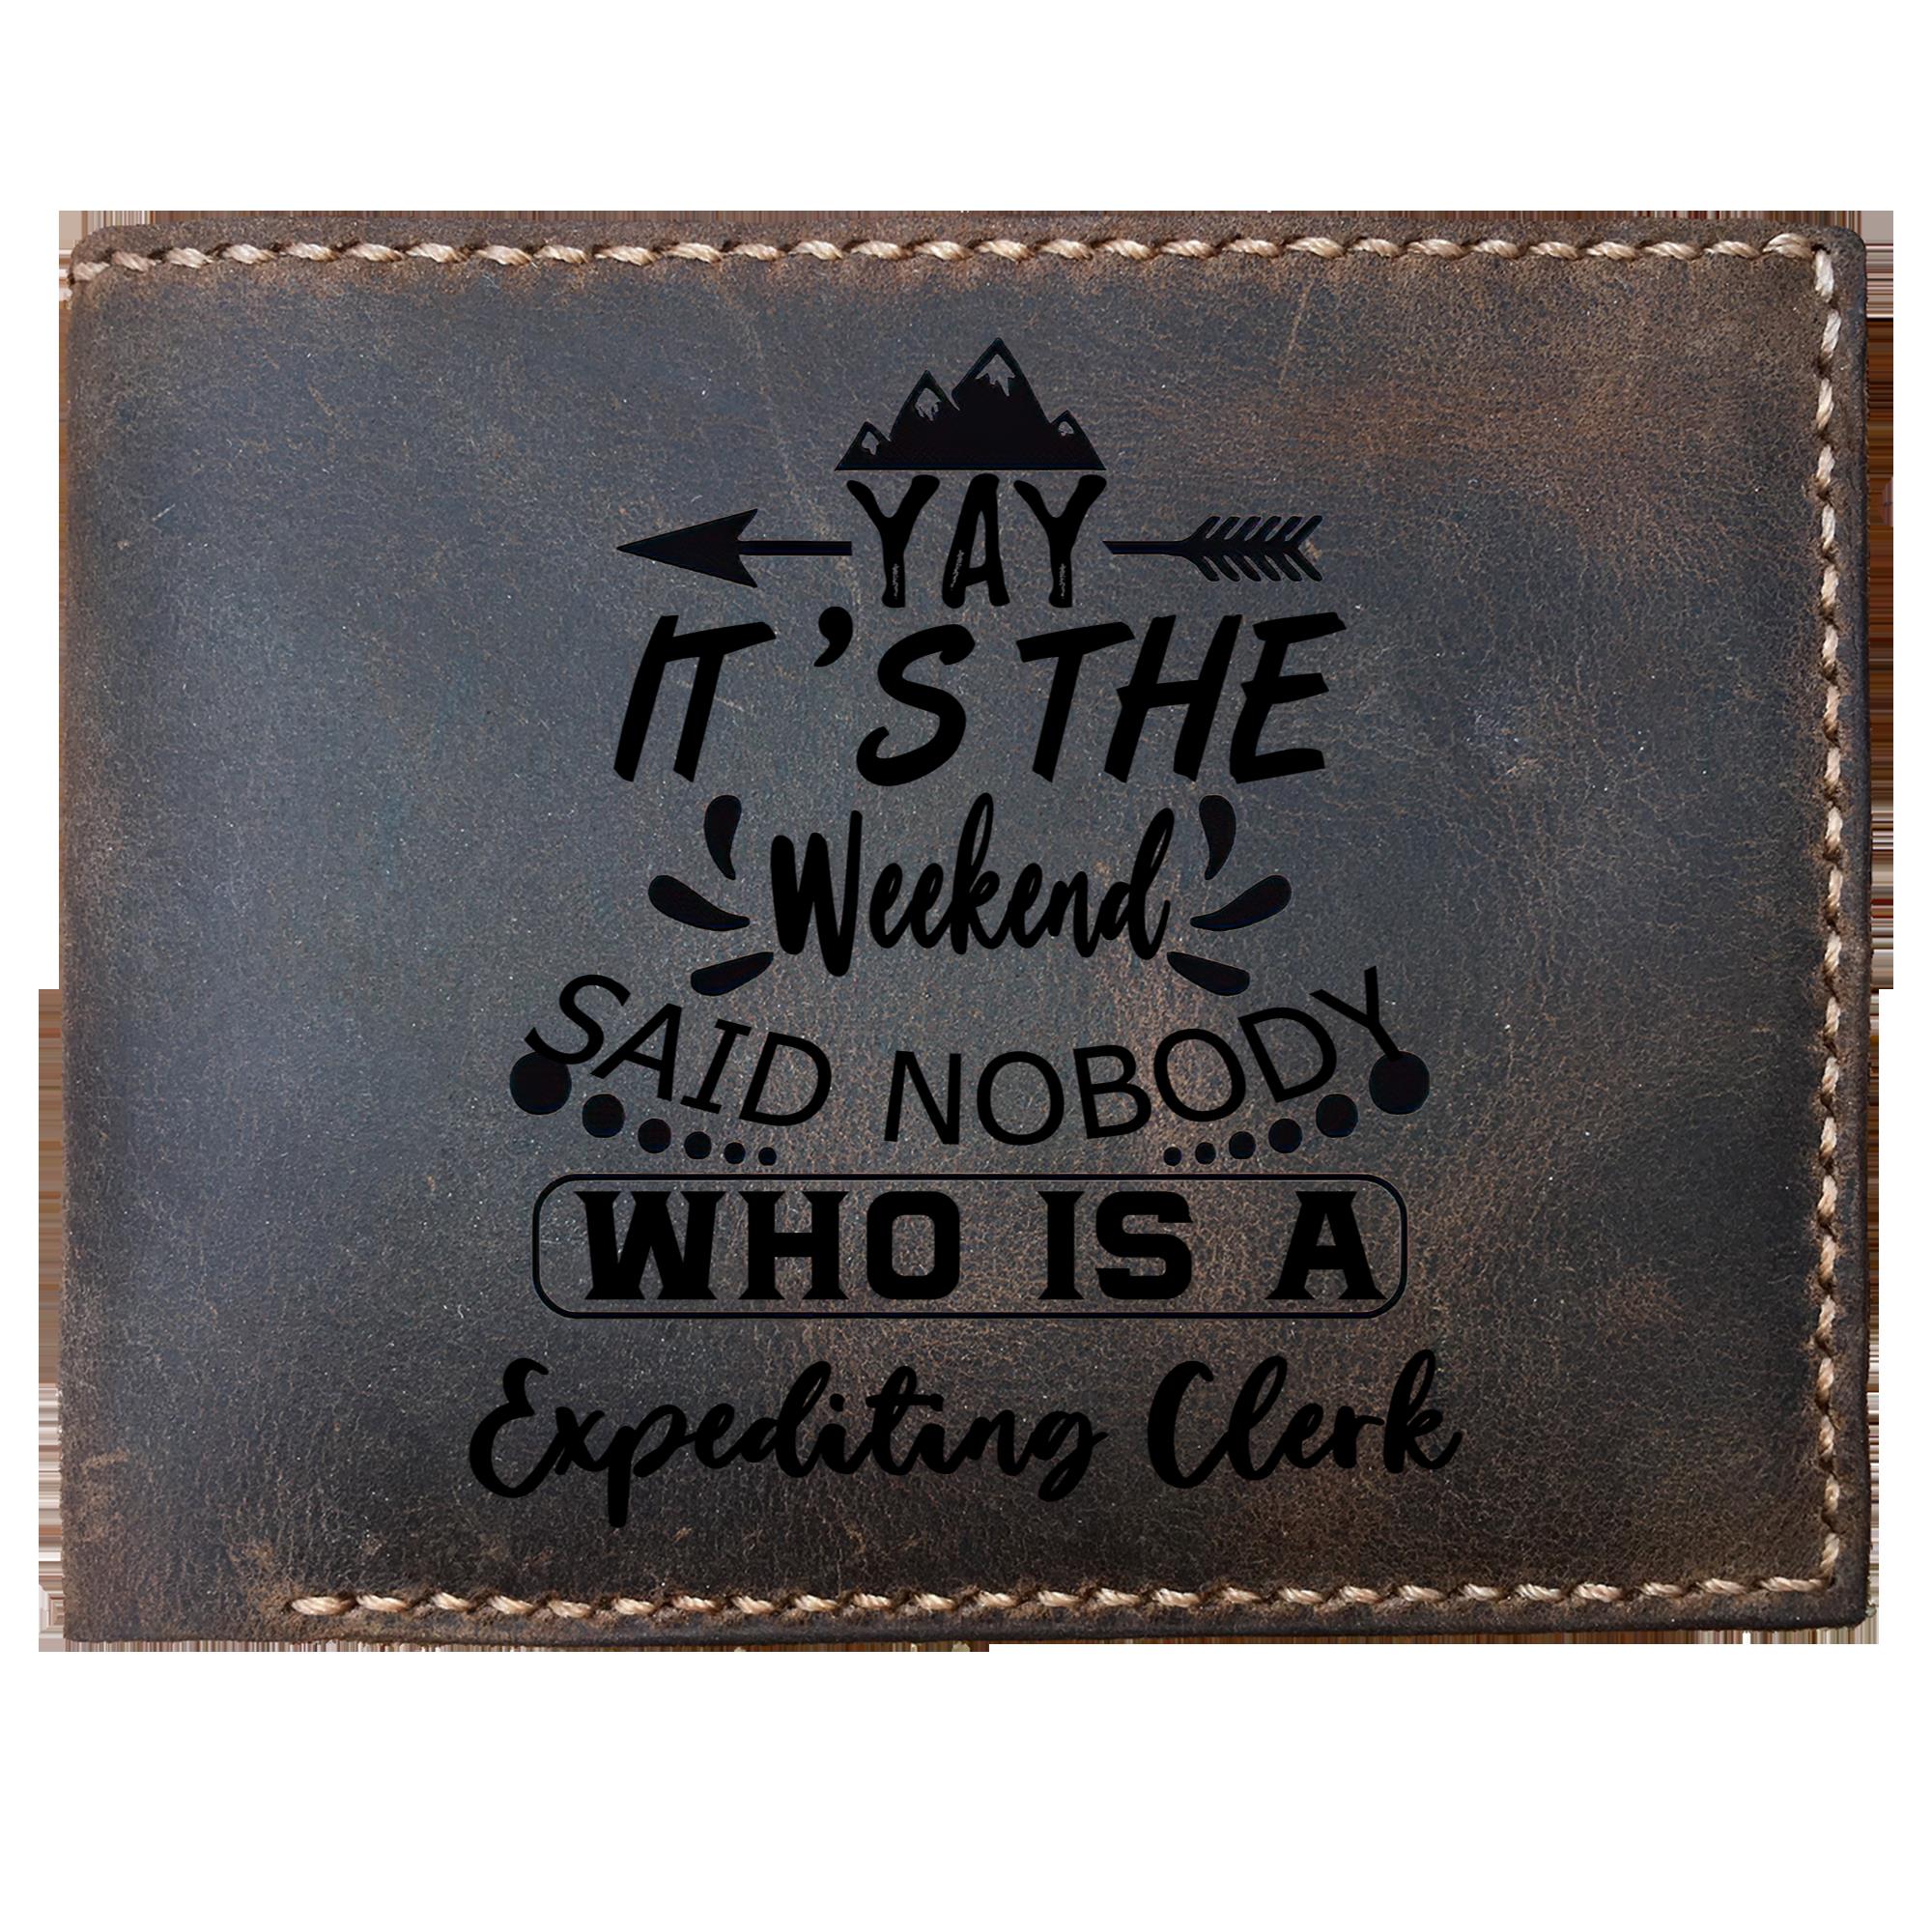 Skitongifts Funny Custom Laser Engraved Bifold Leather Wallet For Men, It's The Weekend Said Nobody Who Is A Expediting Clerk, Father's Day Gifts